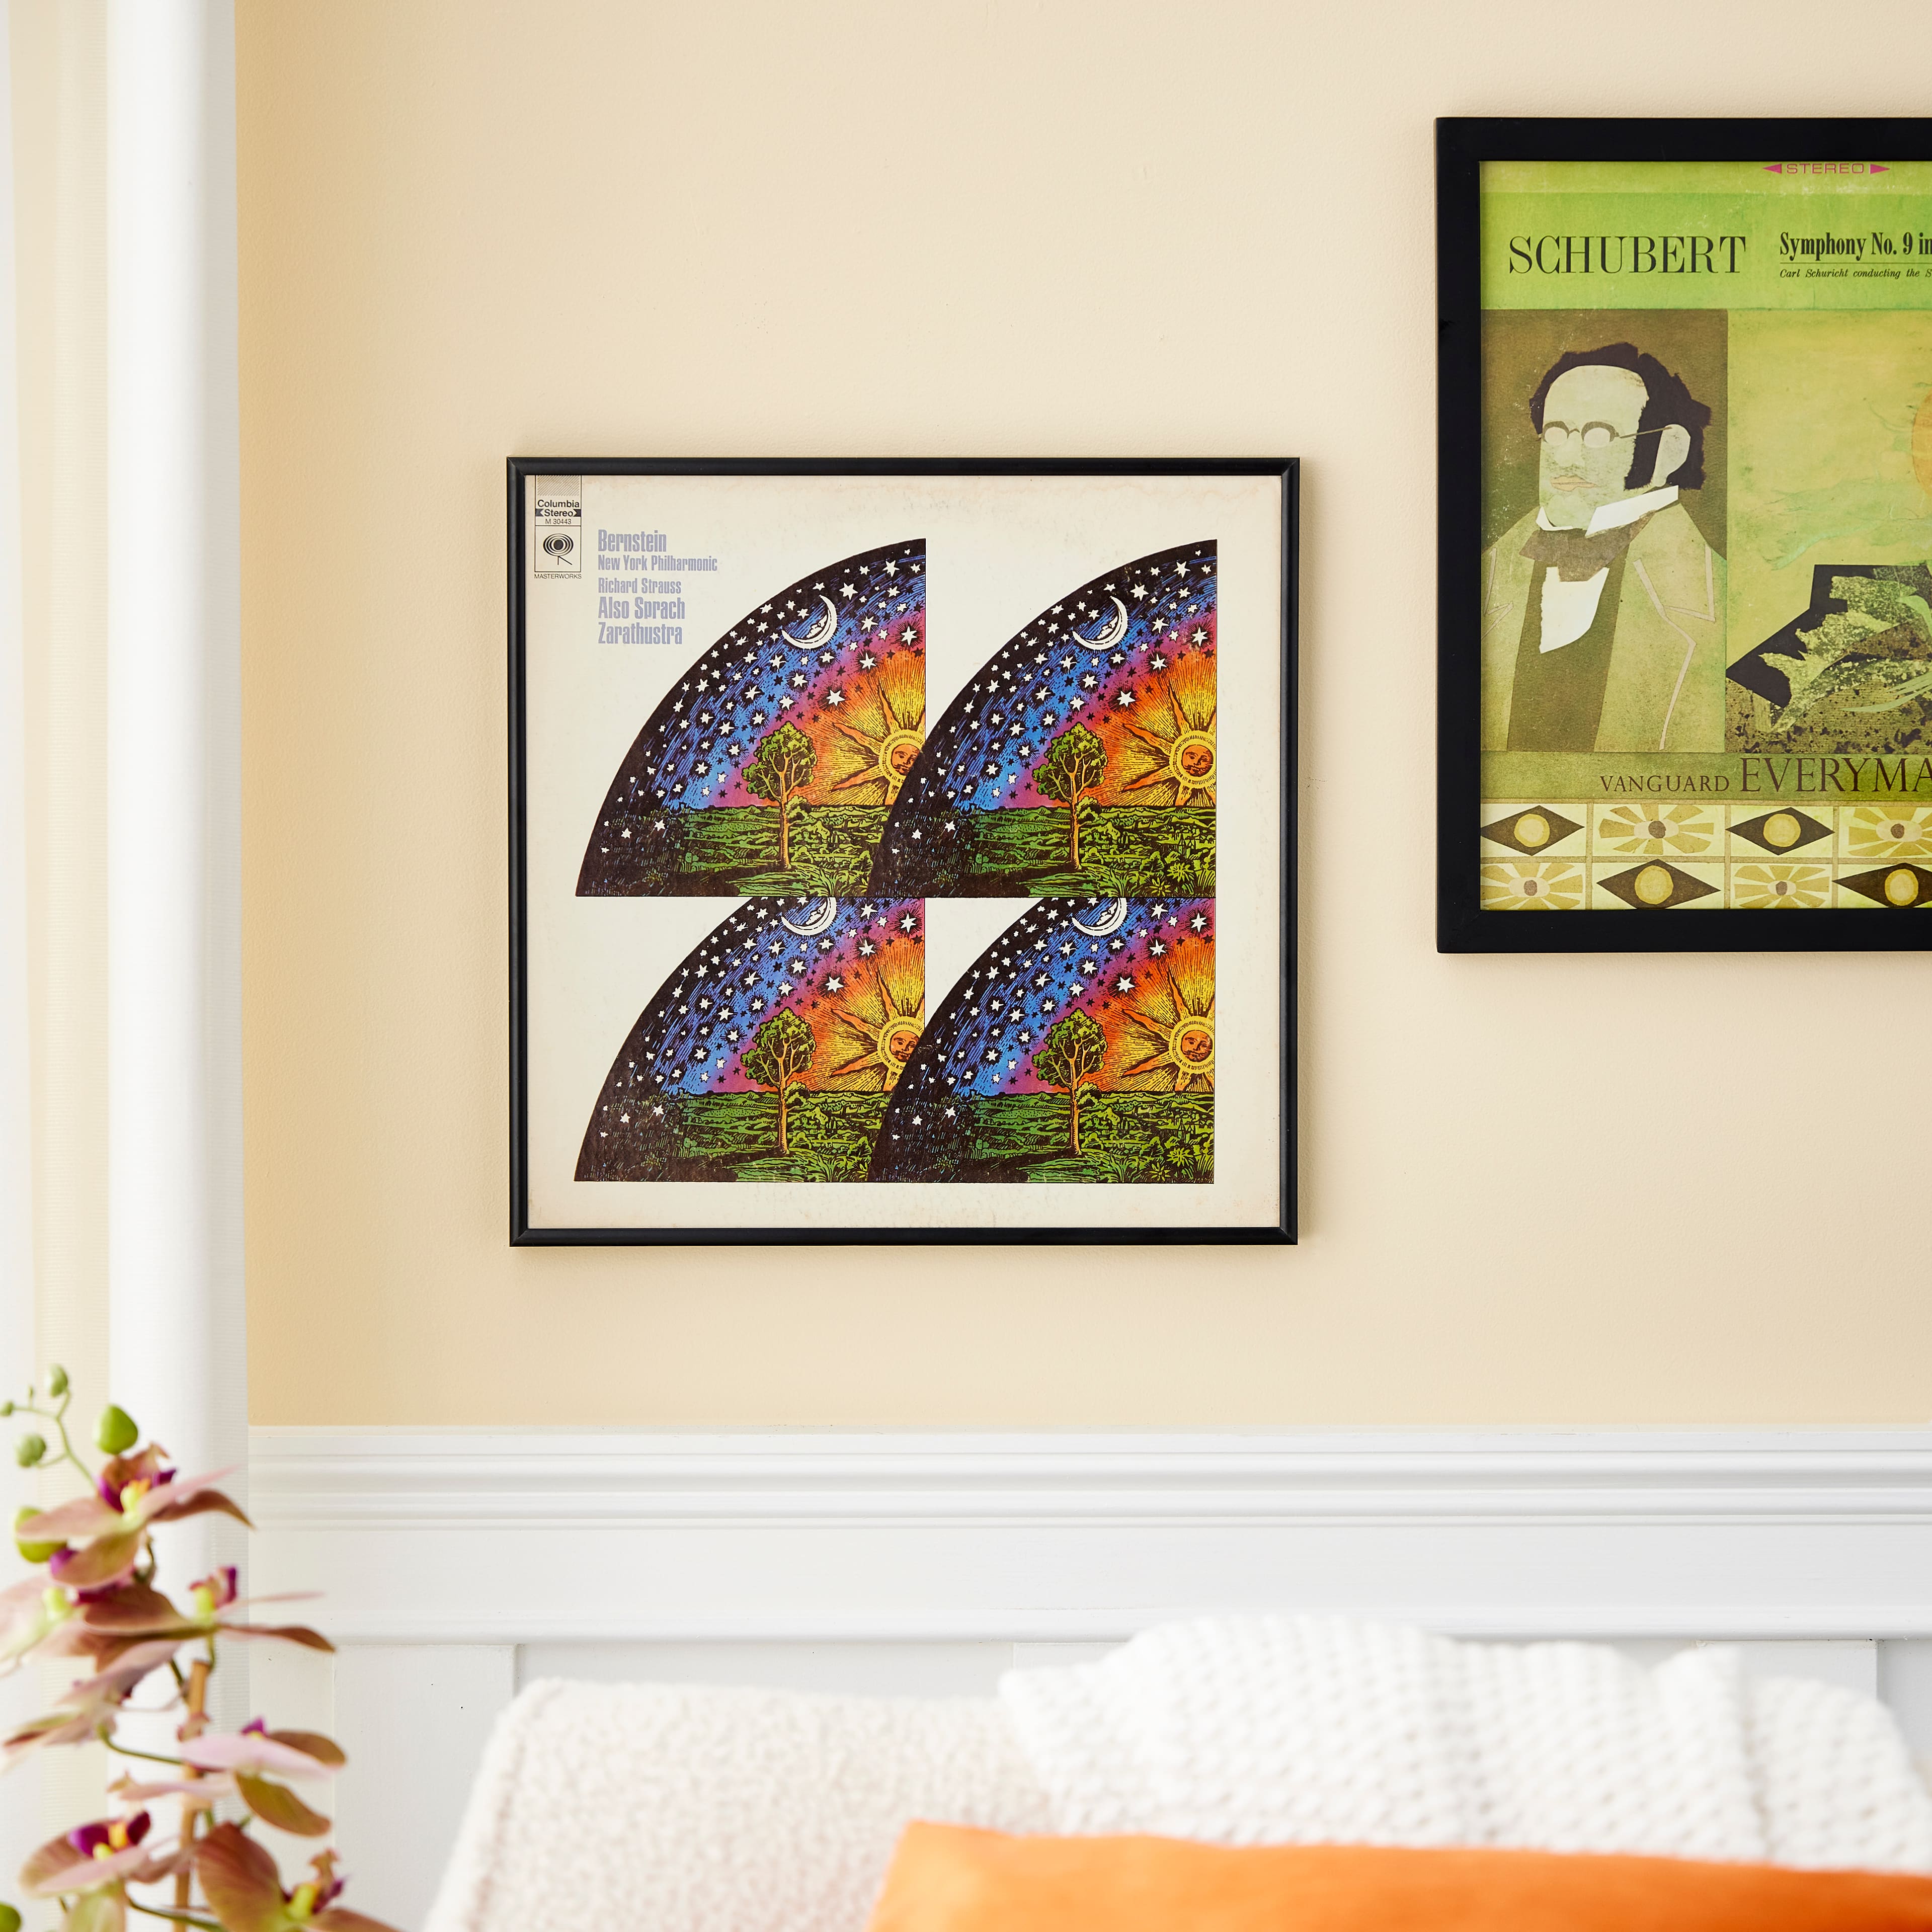 Vinyl Frames – 6 silver frames to display your album cover on the